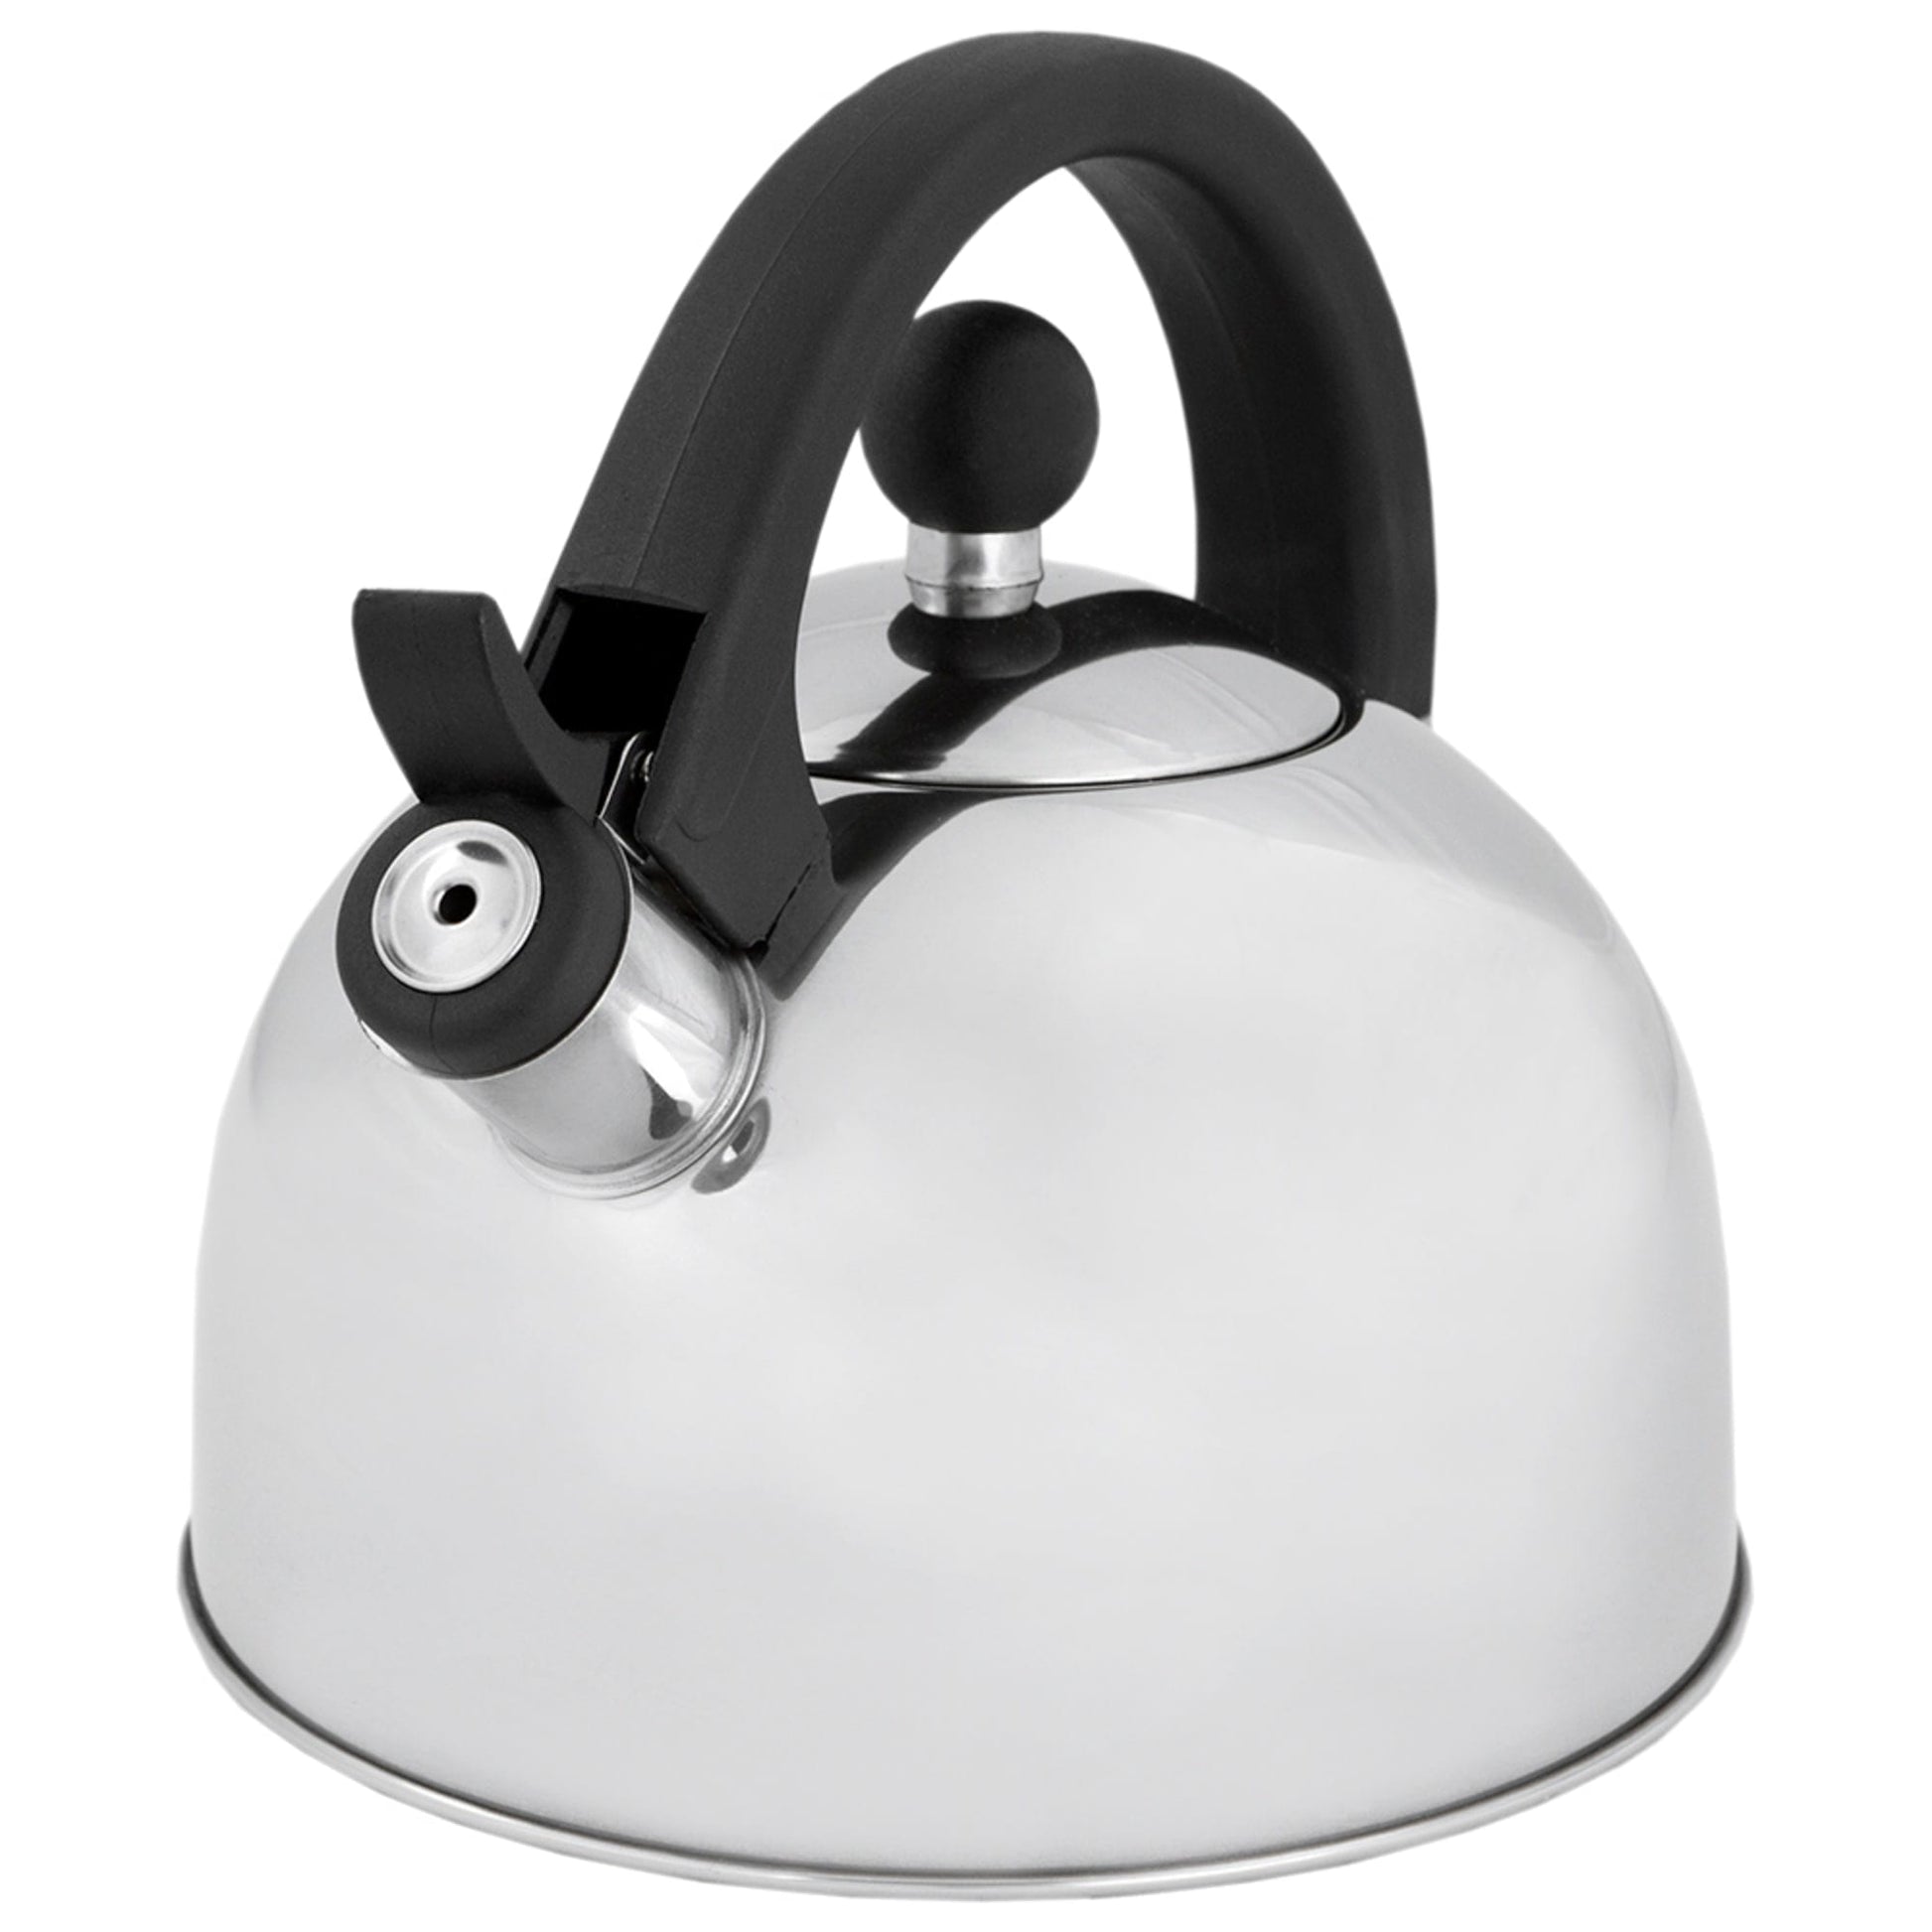 Electric Tea Kettle Stainless Steel 2.5 Liter Instant Hot Water